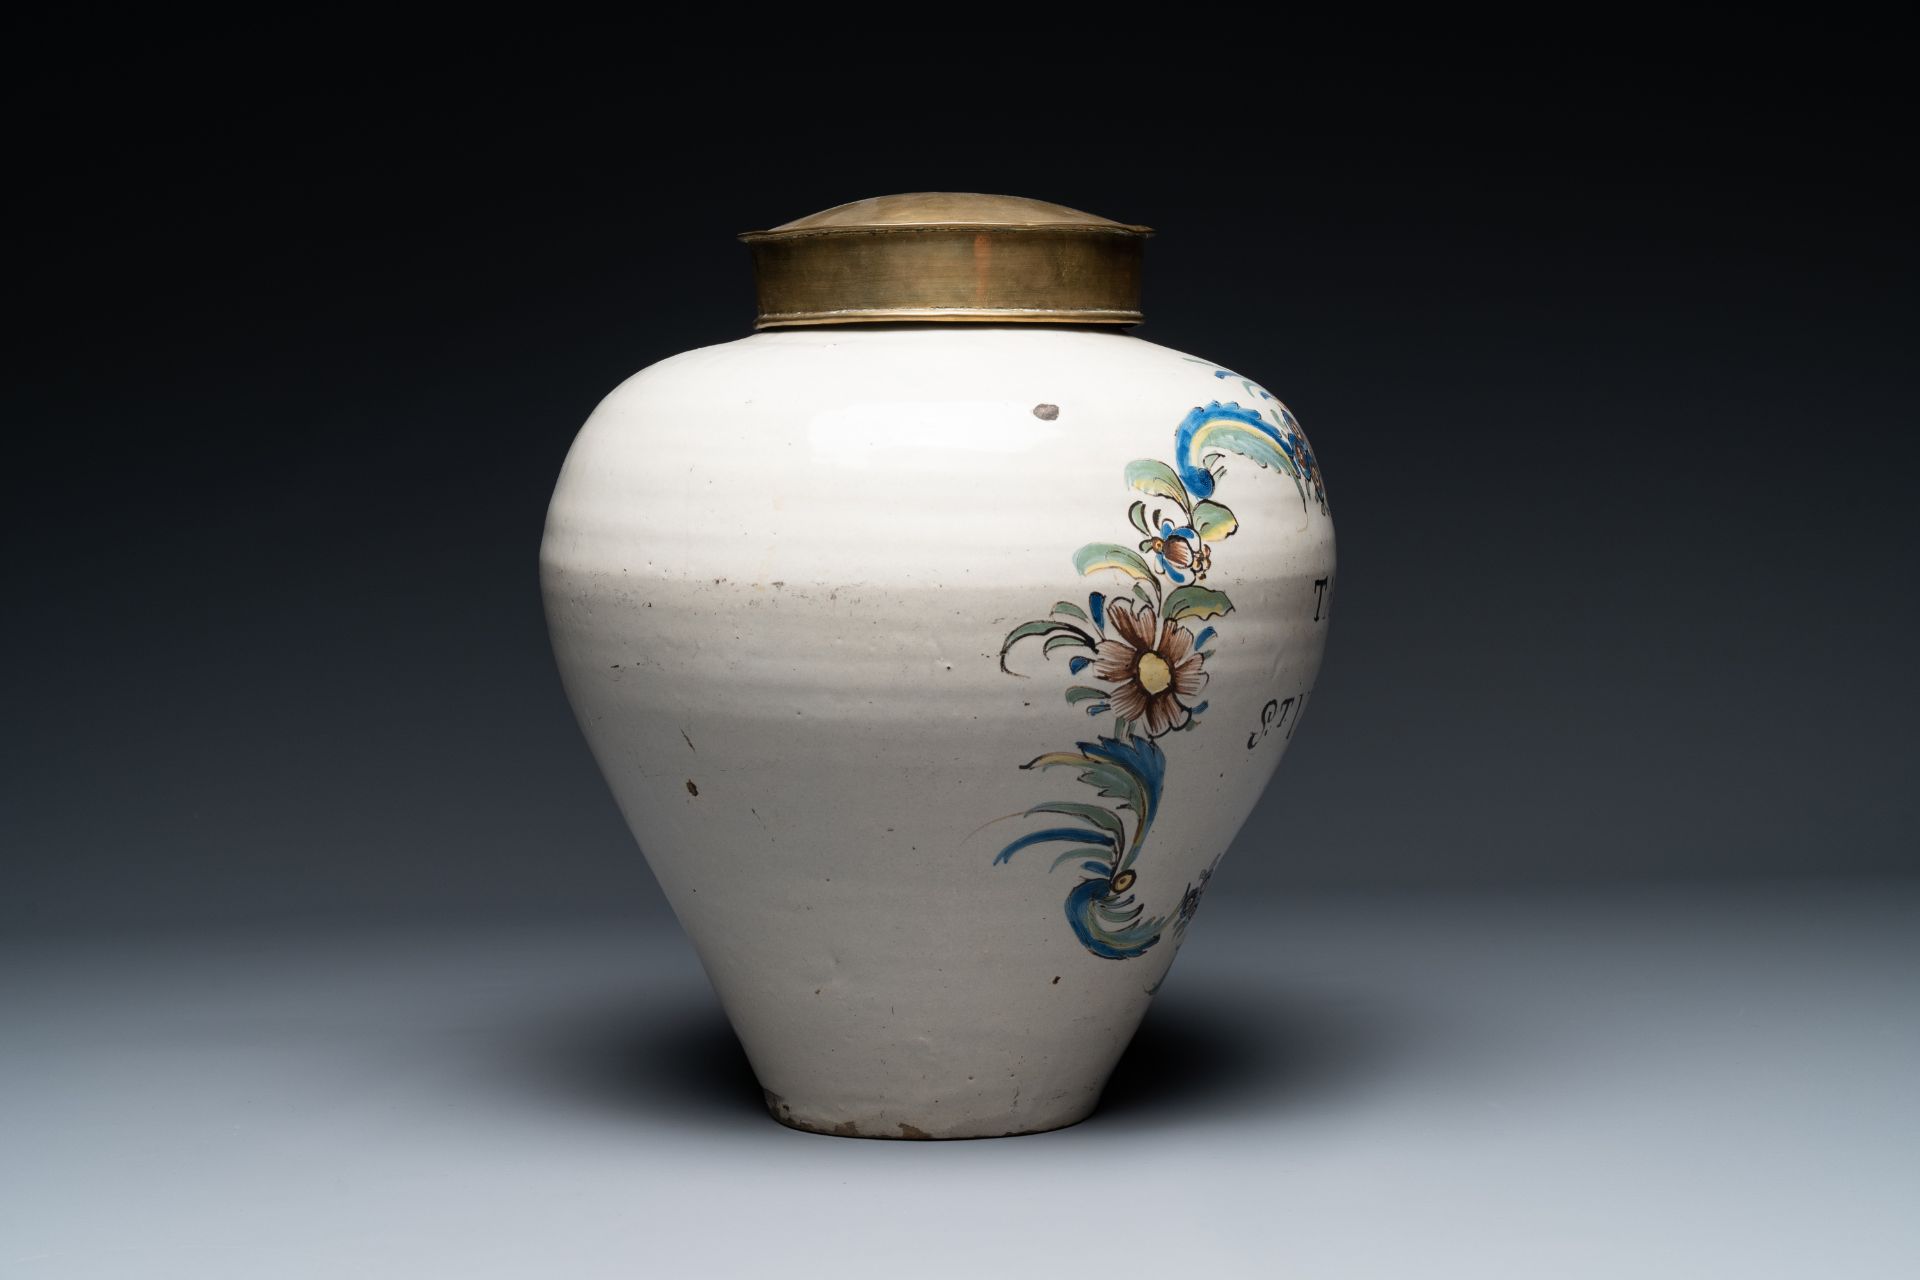 A polychrome pottery 'St. Vincent' tobacco jar, France, 18th century - Image 13 of 19